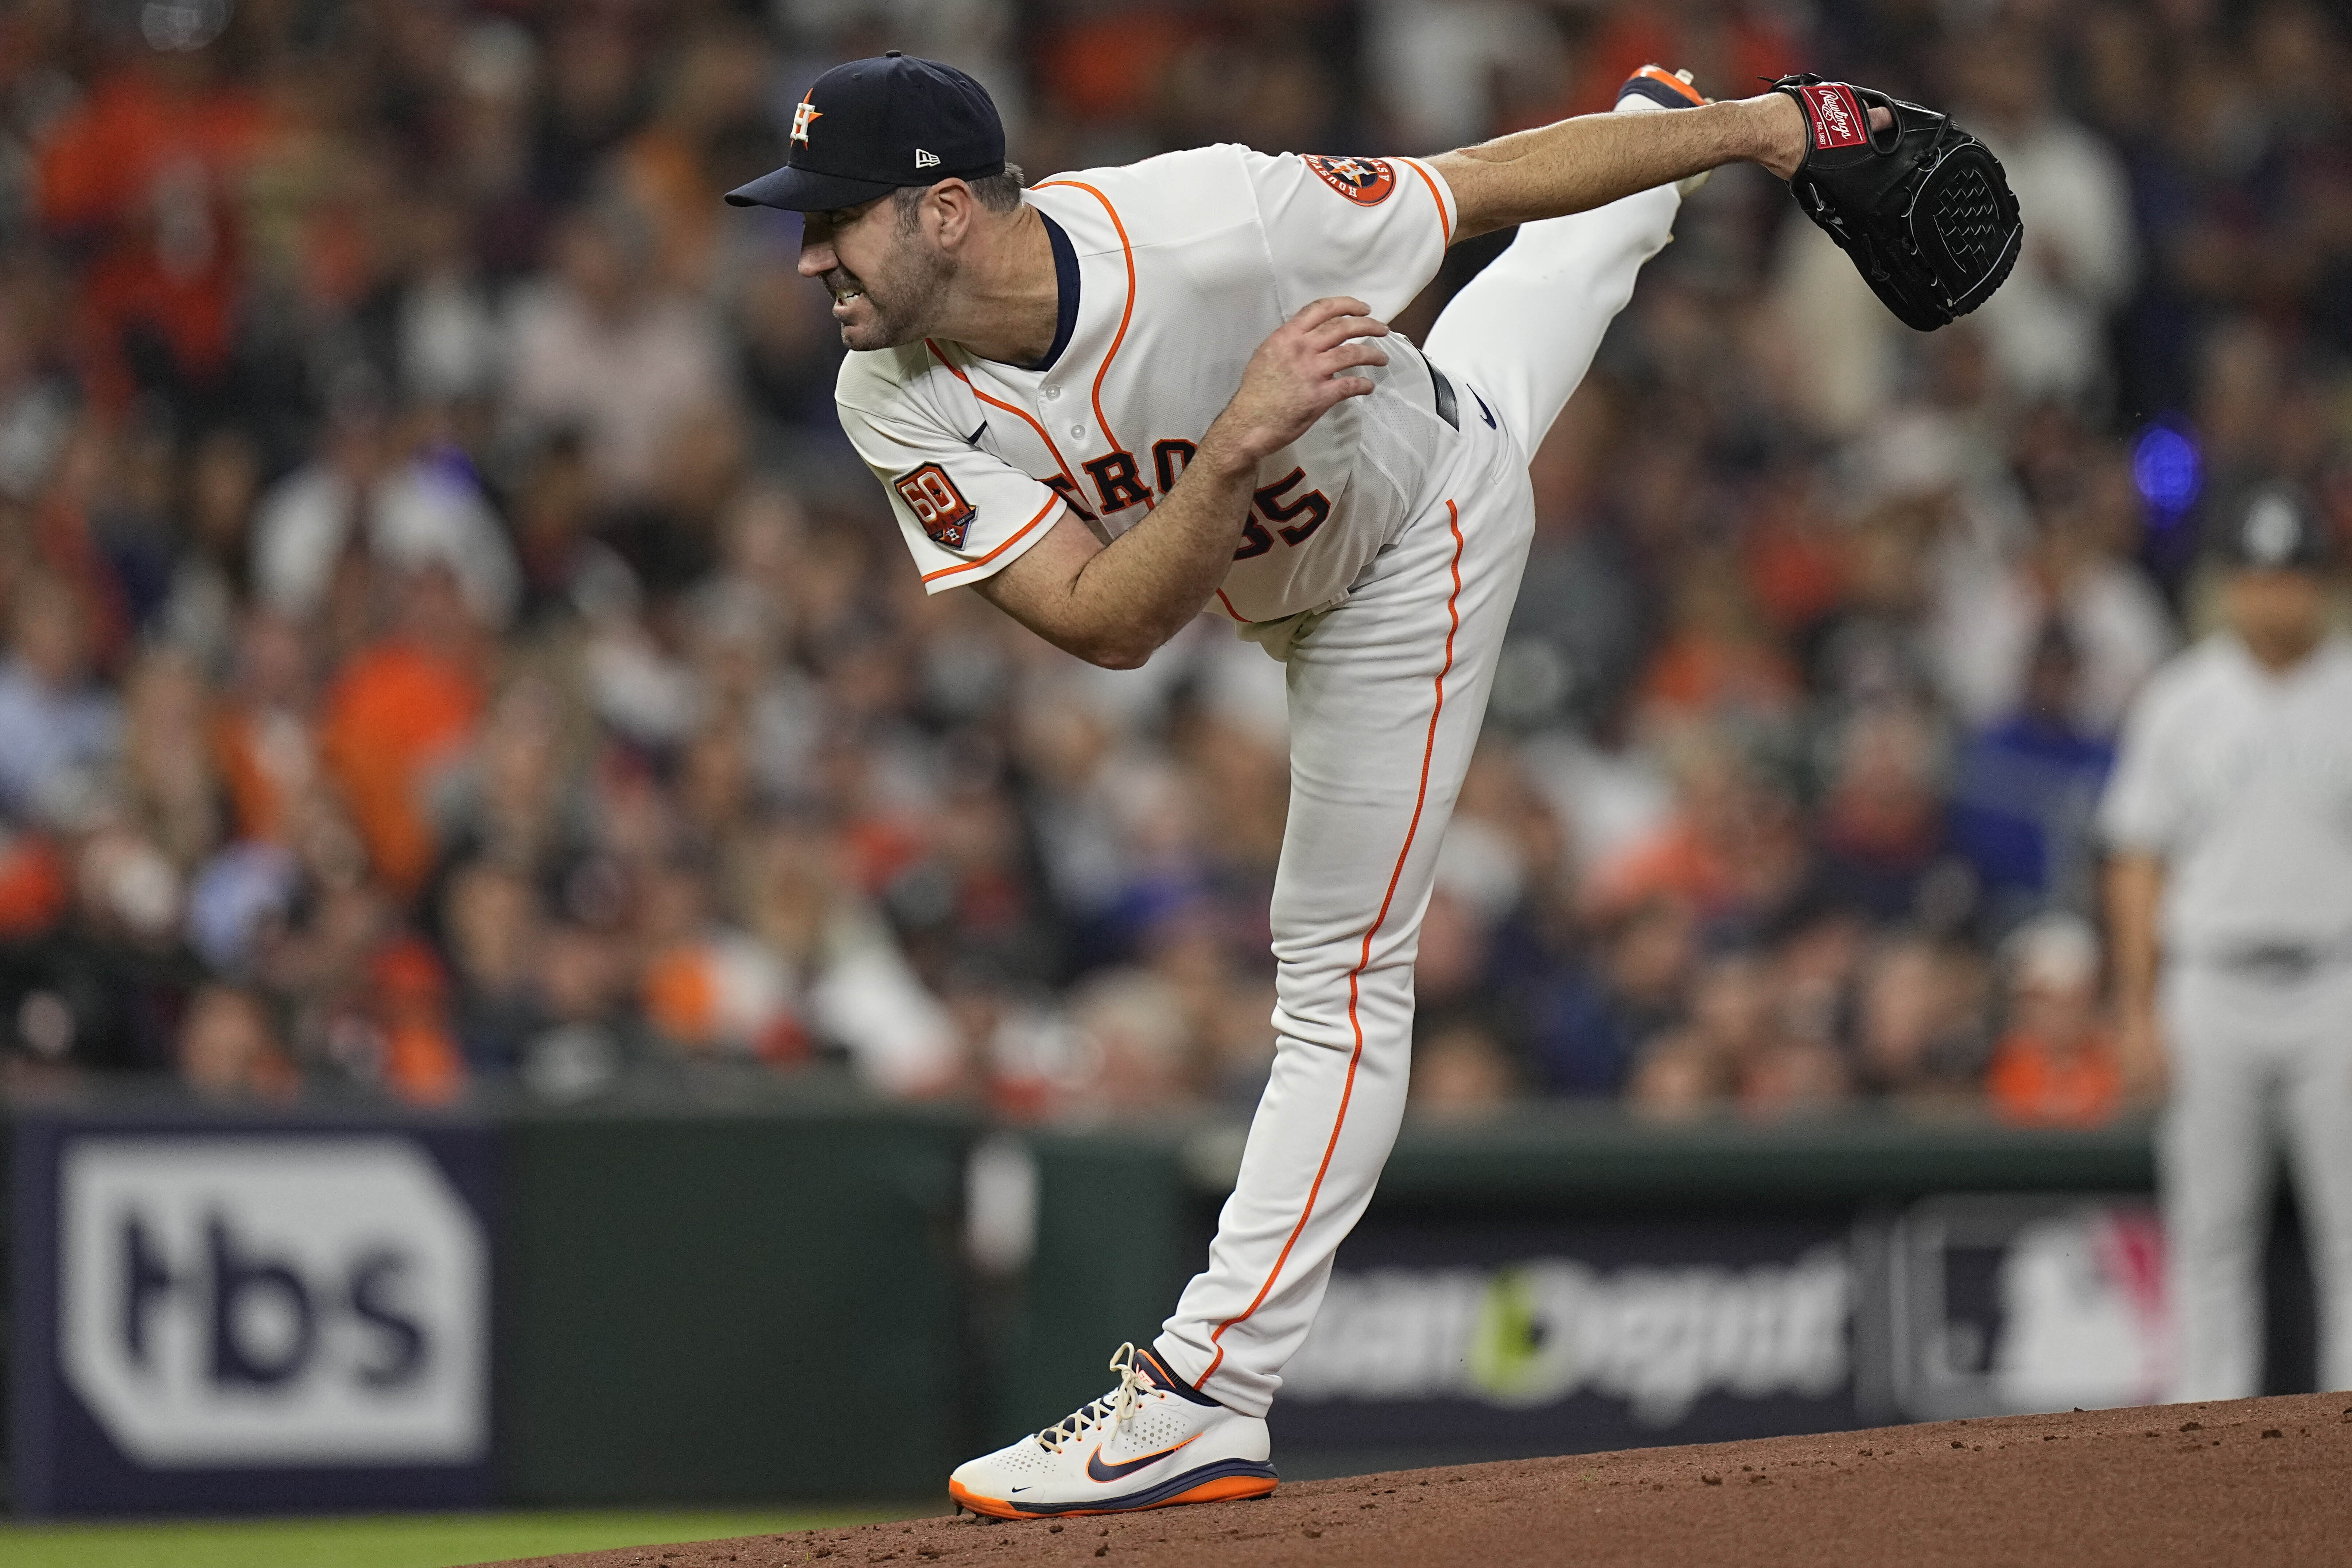 Gurriel, Astros come up big in the 4th off Kershaw in Game 5 of